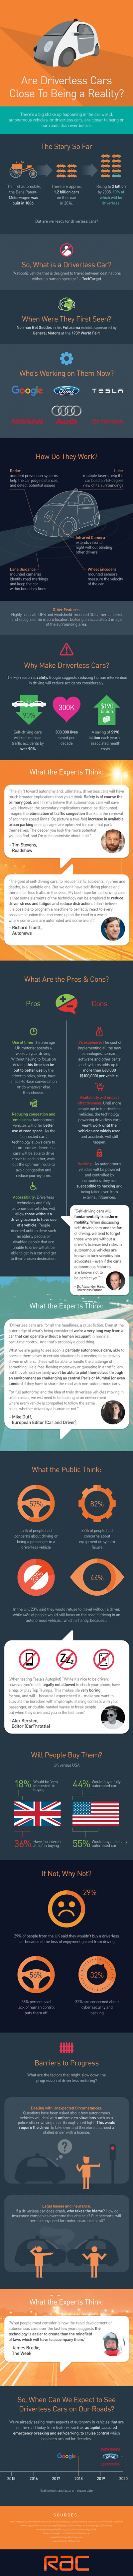 driverless-cars-coming